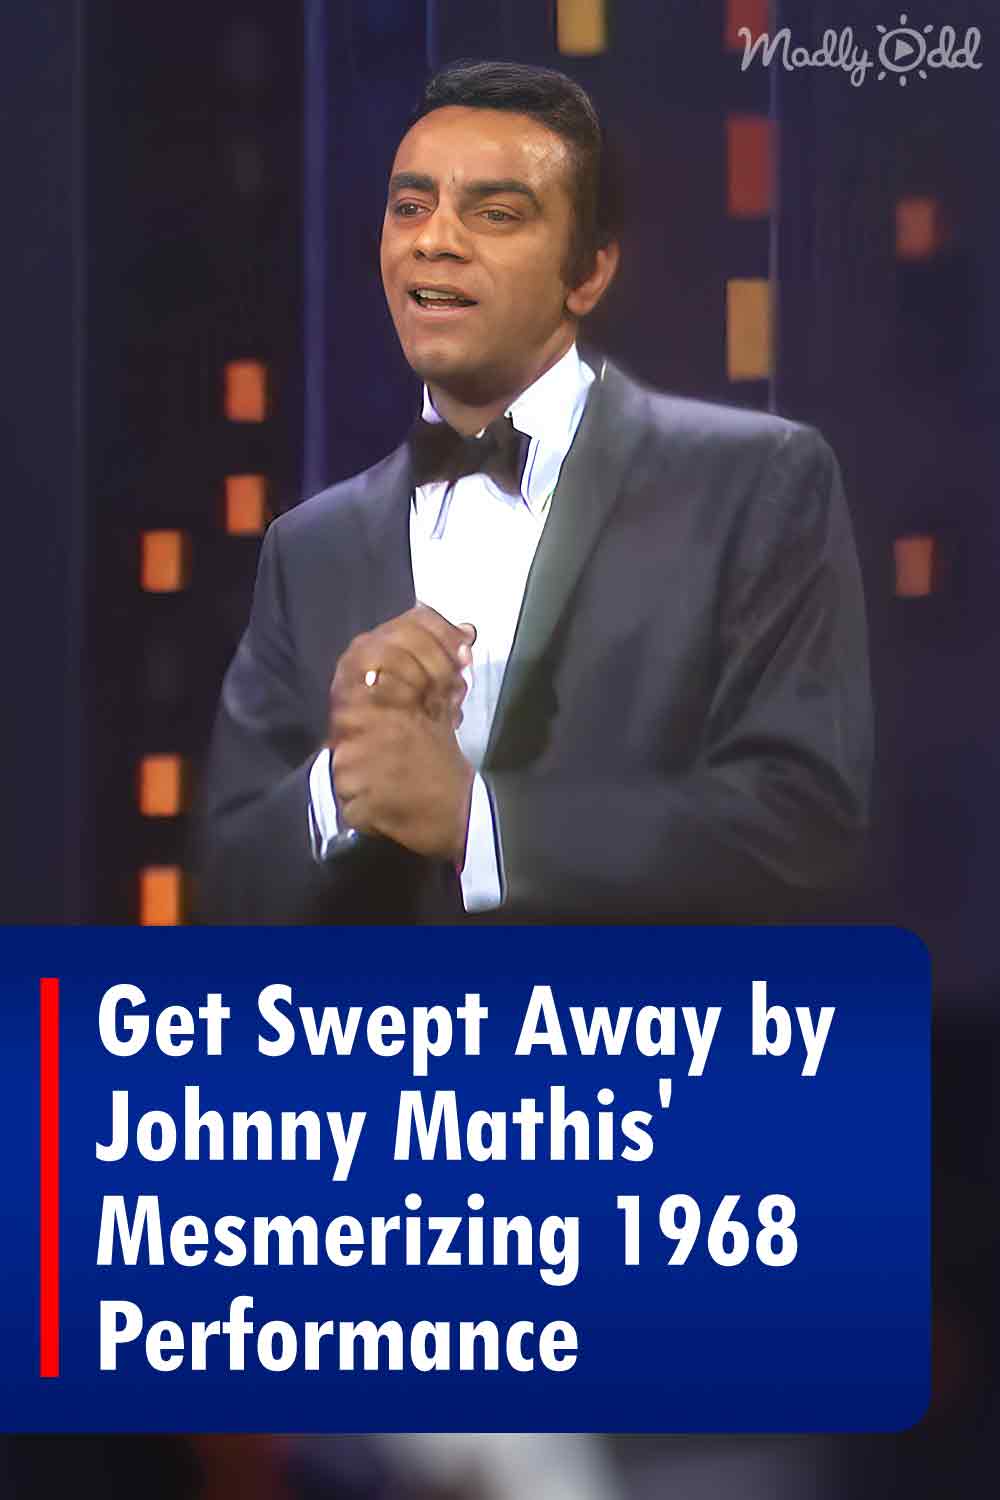 Get Swept Away by Johnny Mathis\' Mesmerizing 1968 Performance